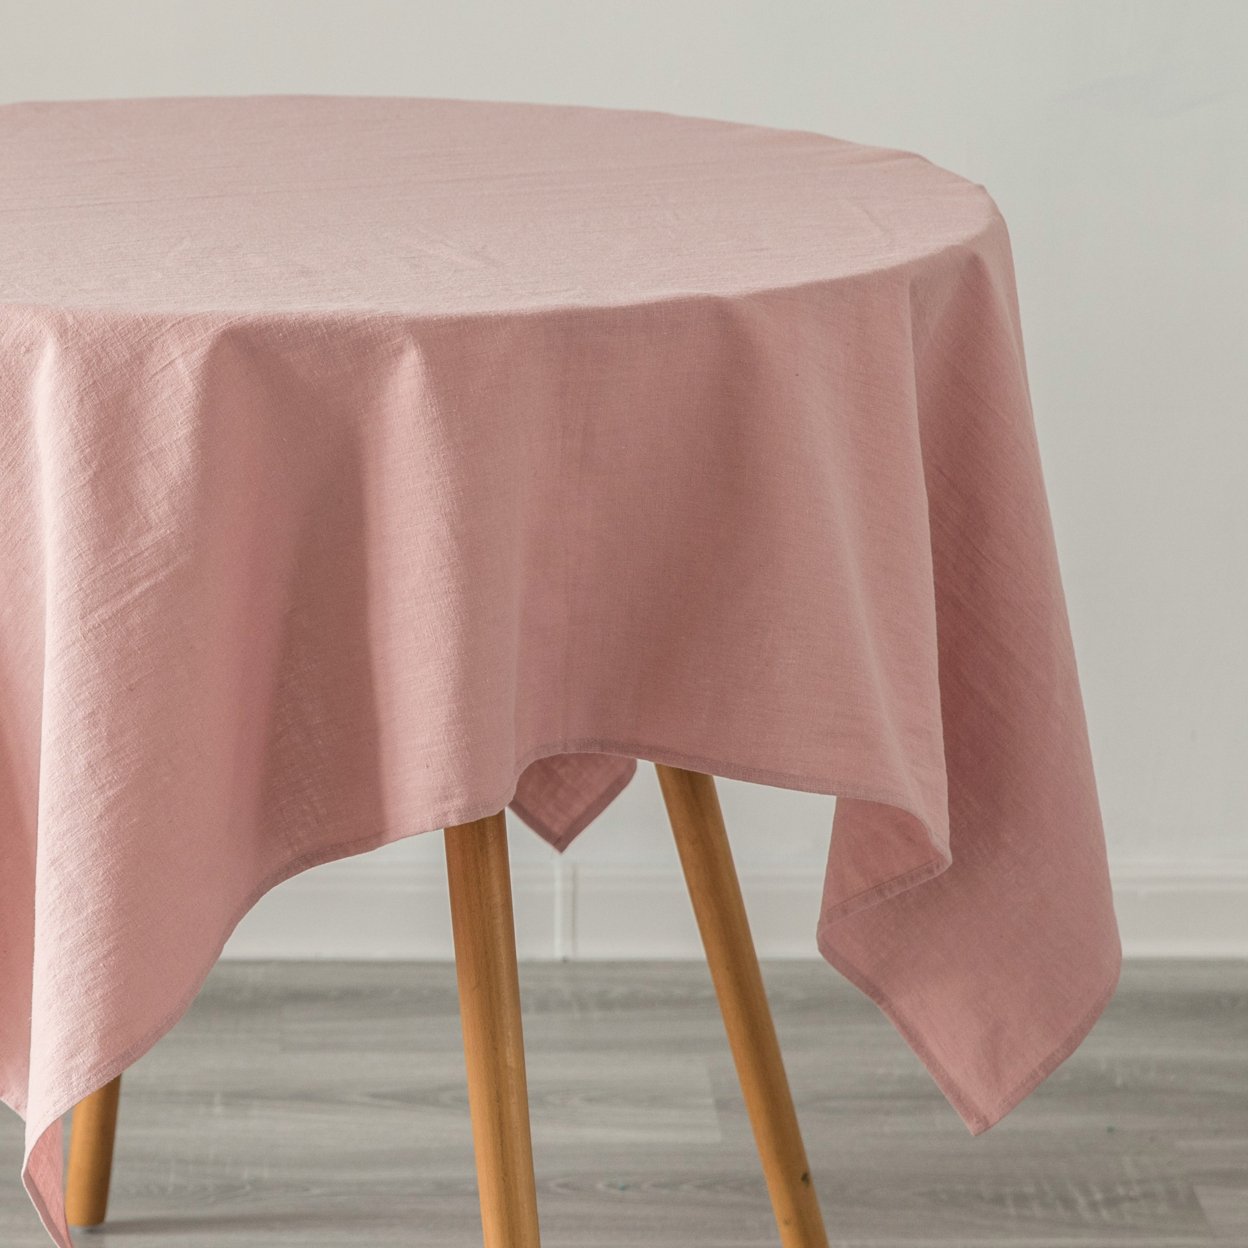 Deerlux 100 Percent Pure Linen Washable Tablecloth Solid Color - 52 X 70 In. Pink